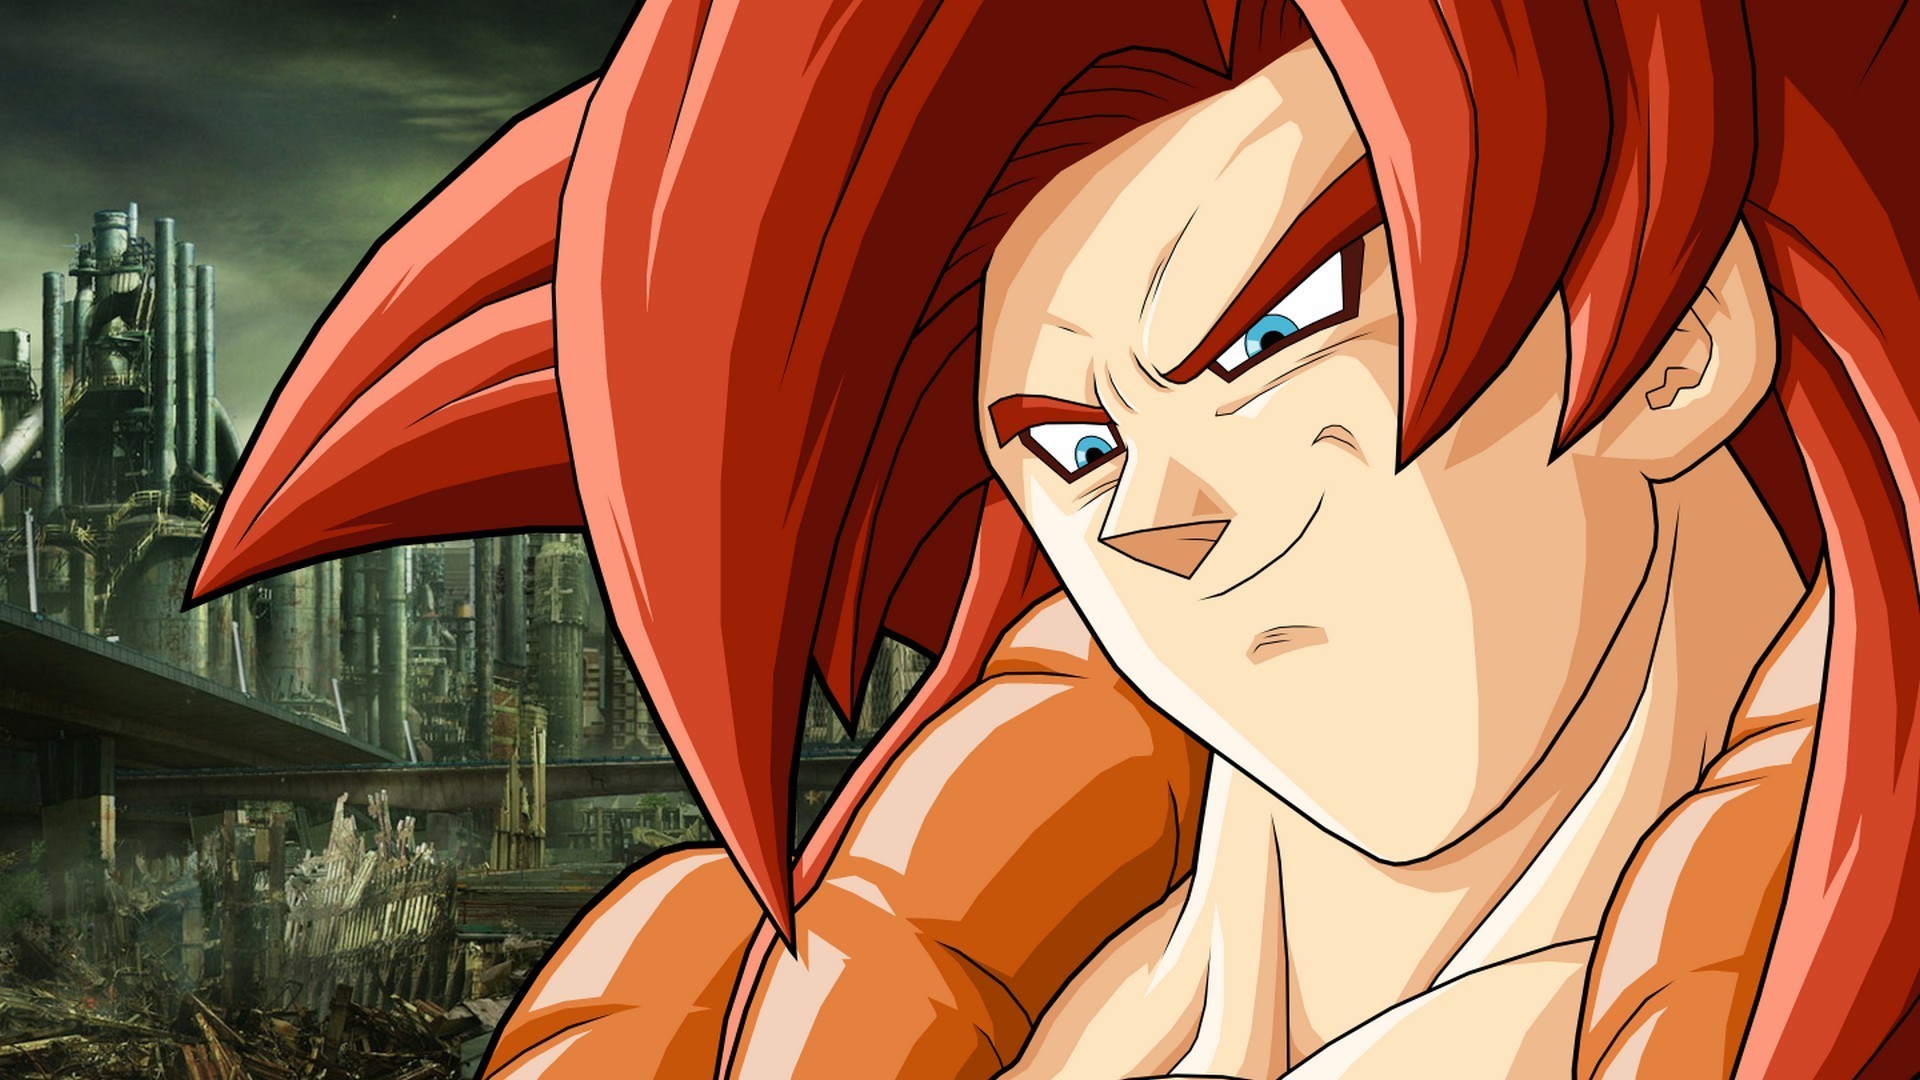 Wallpaper Goku SSJ4 HD With Resolution 1920X1080 pixel. You can make this wallpaper for your Desktop Computer Backgrounds, Mac Wallpapers, Android Lock screen or iPhone Screensavers